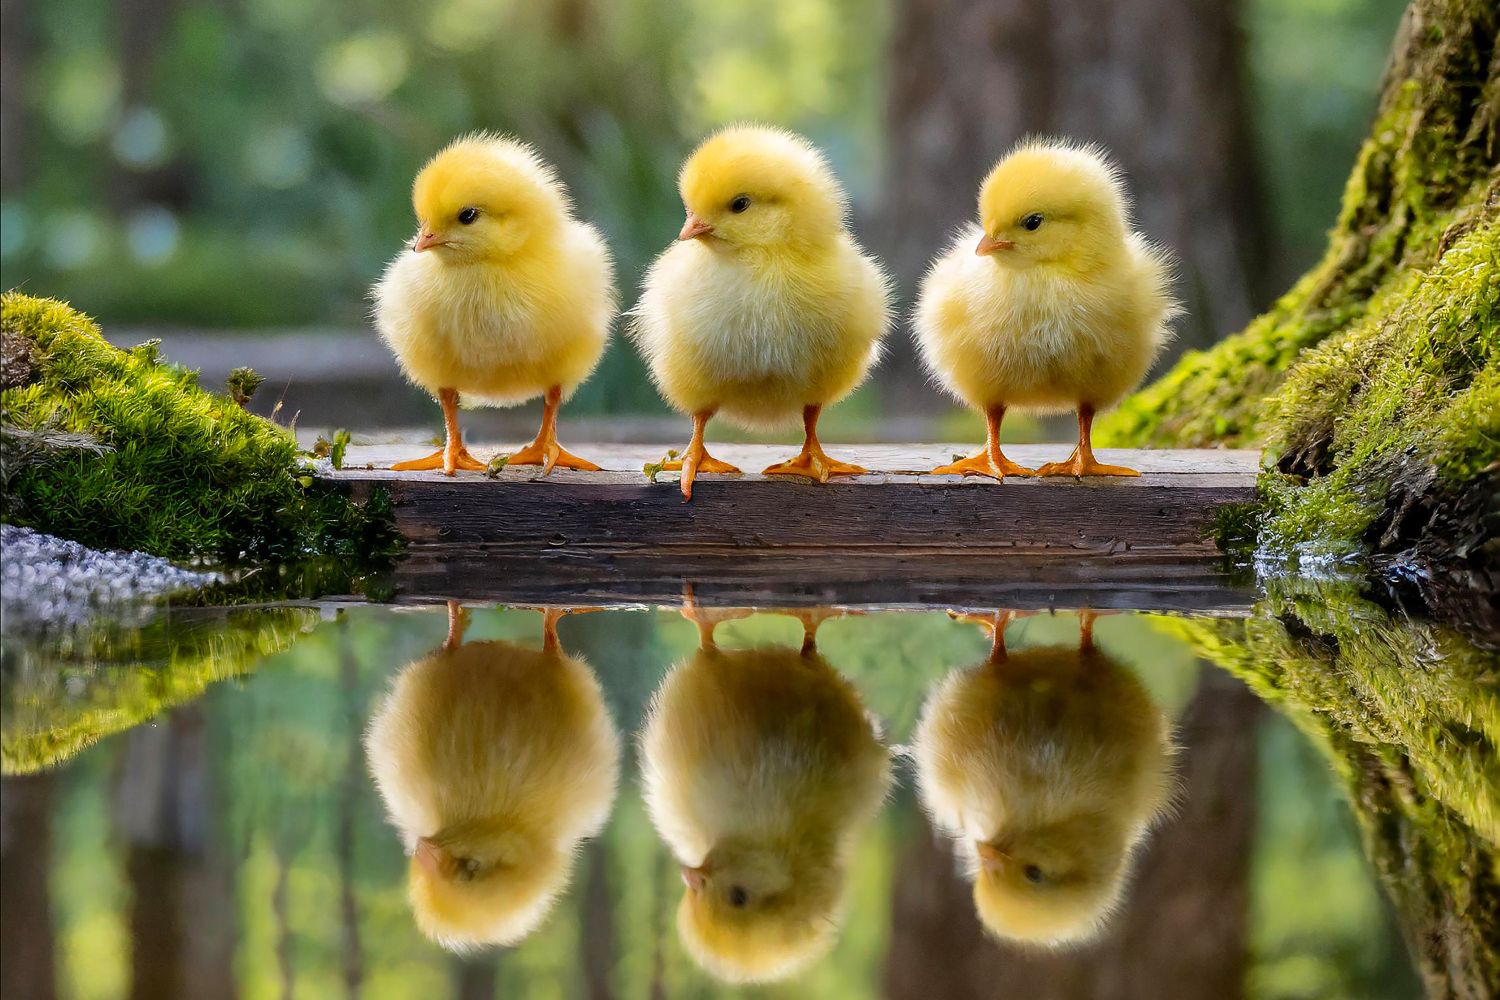 A day out for three fluffy chicks by Martin Lawrence Photography